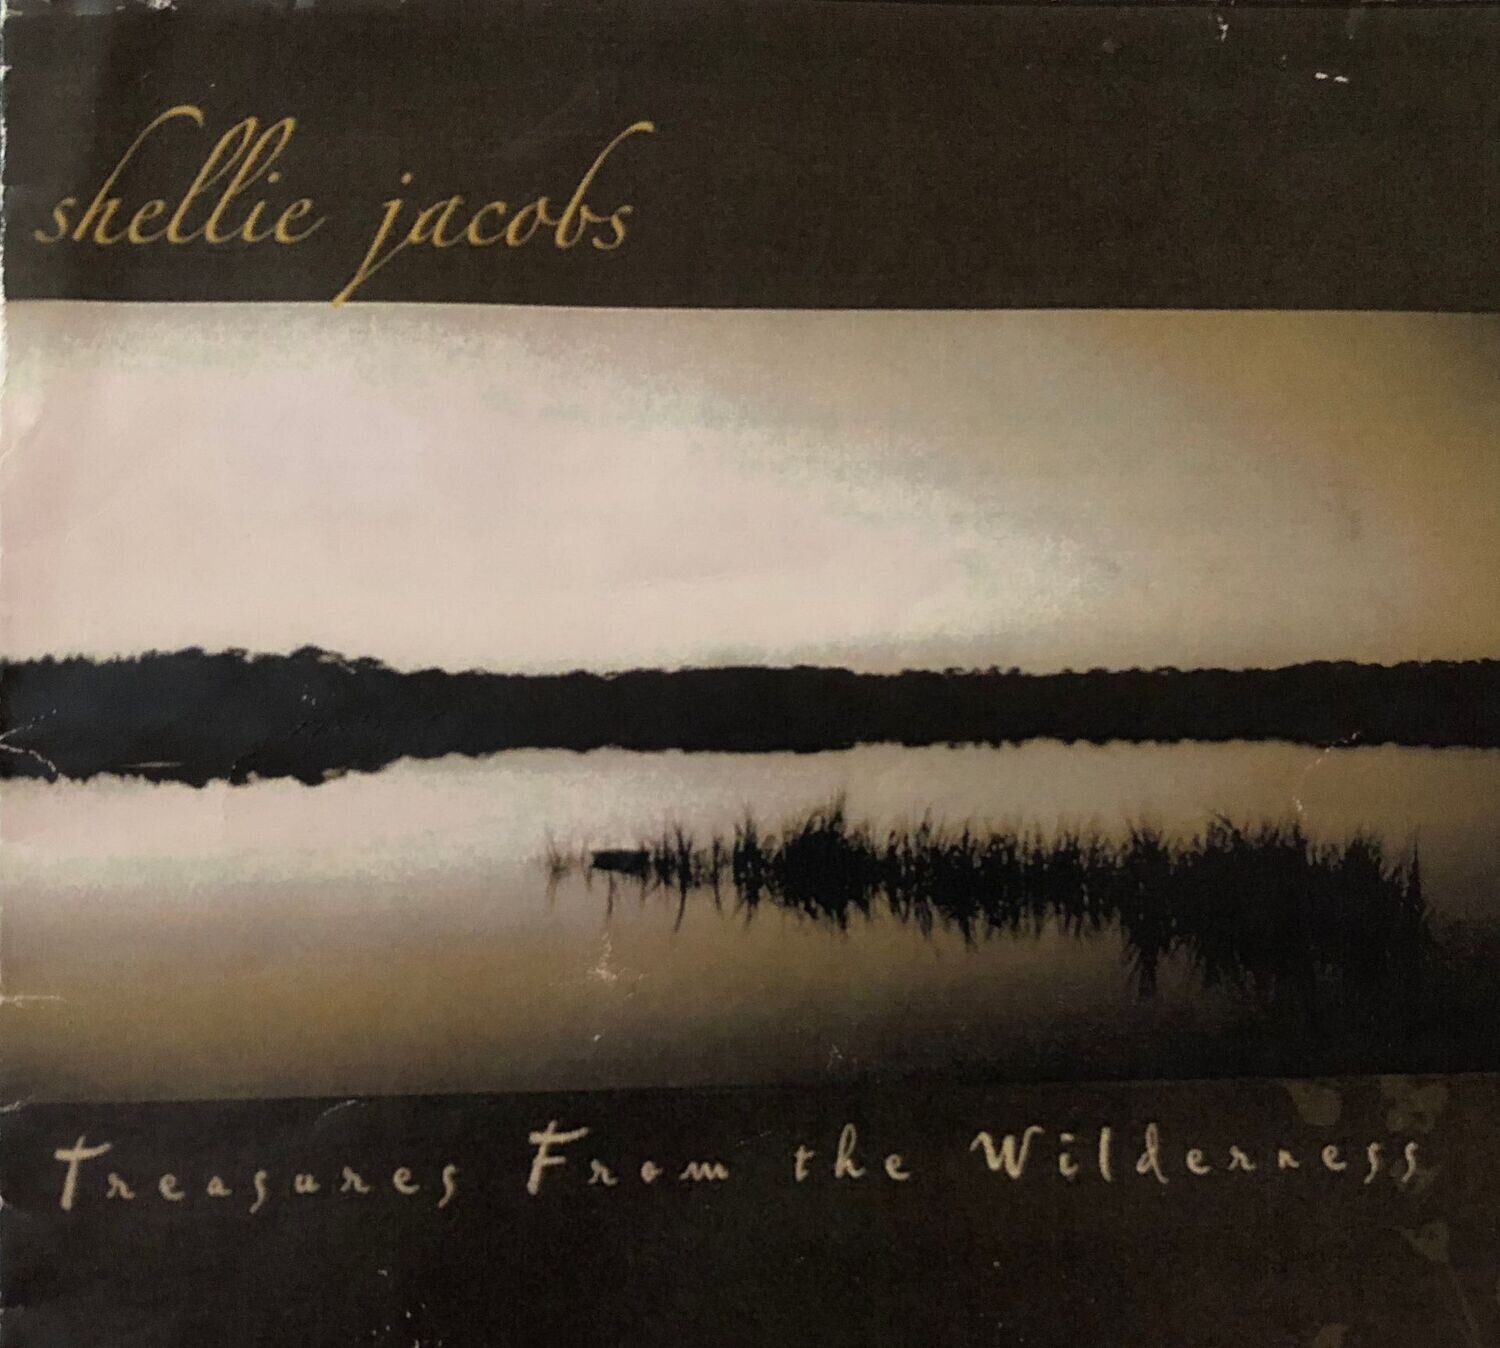 “Treasures from the Wilderness” CD